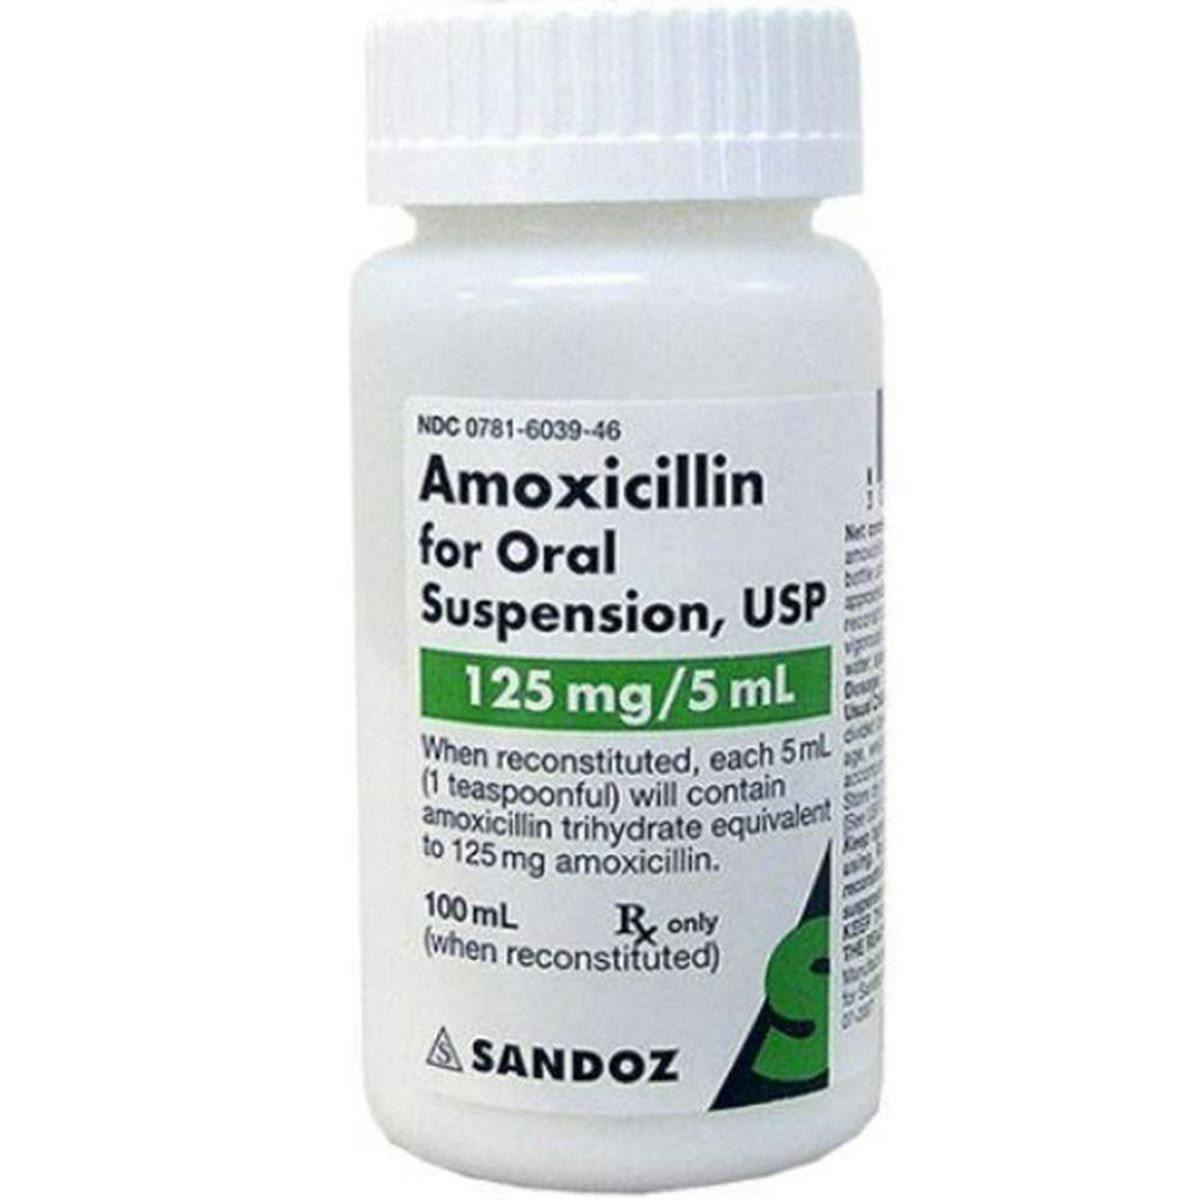 Hospital Demand for Amoxicillin Increases While Shortage Continues